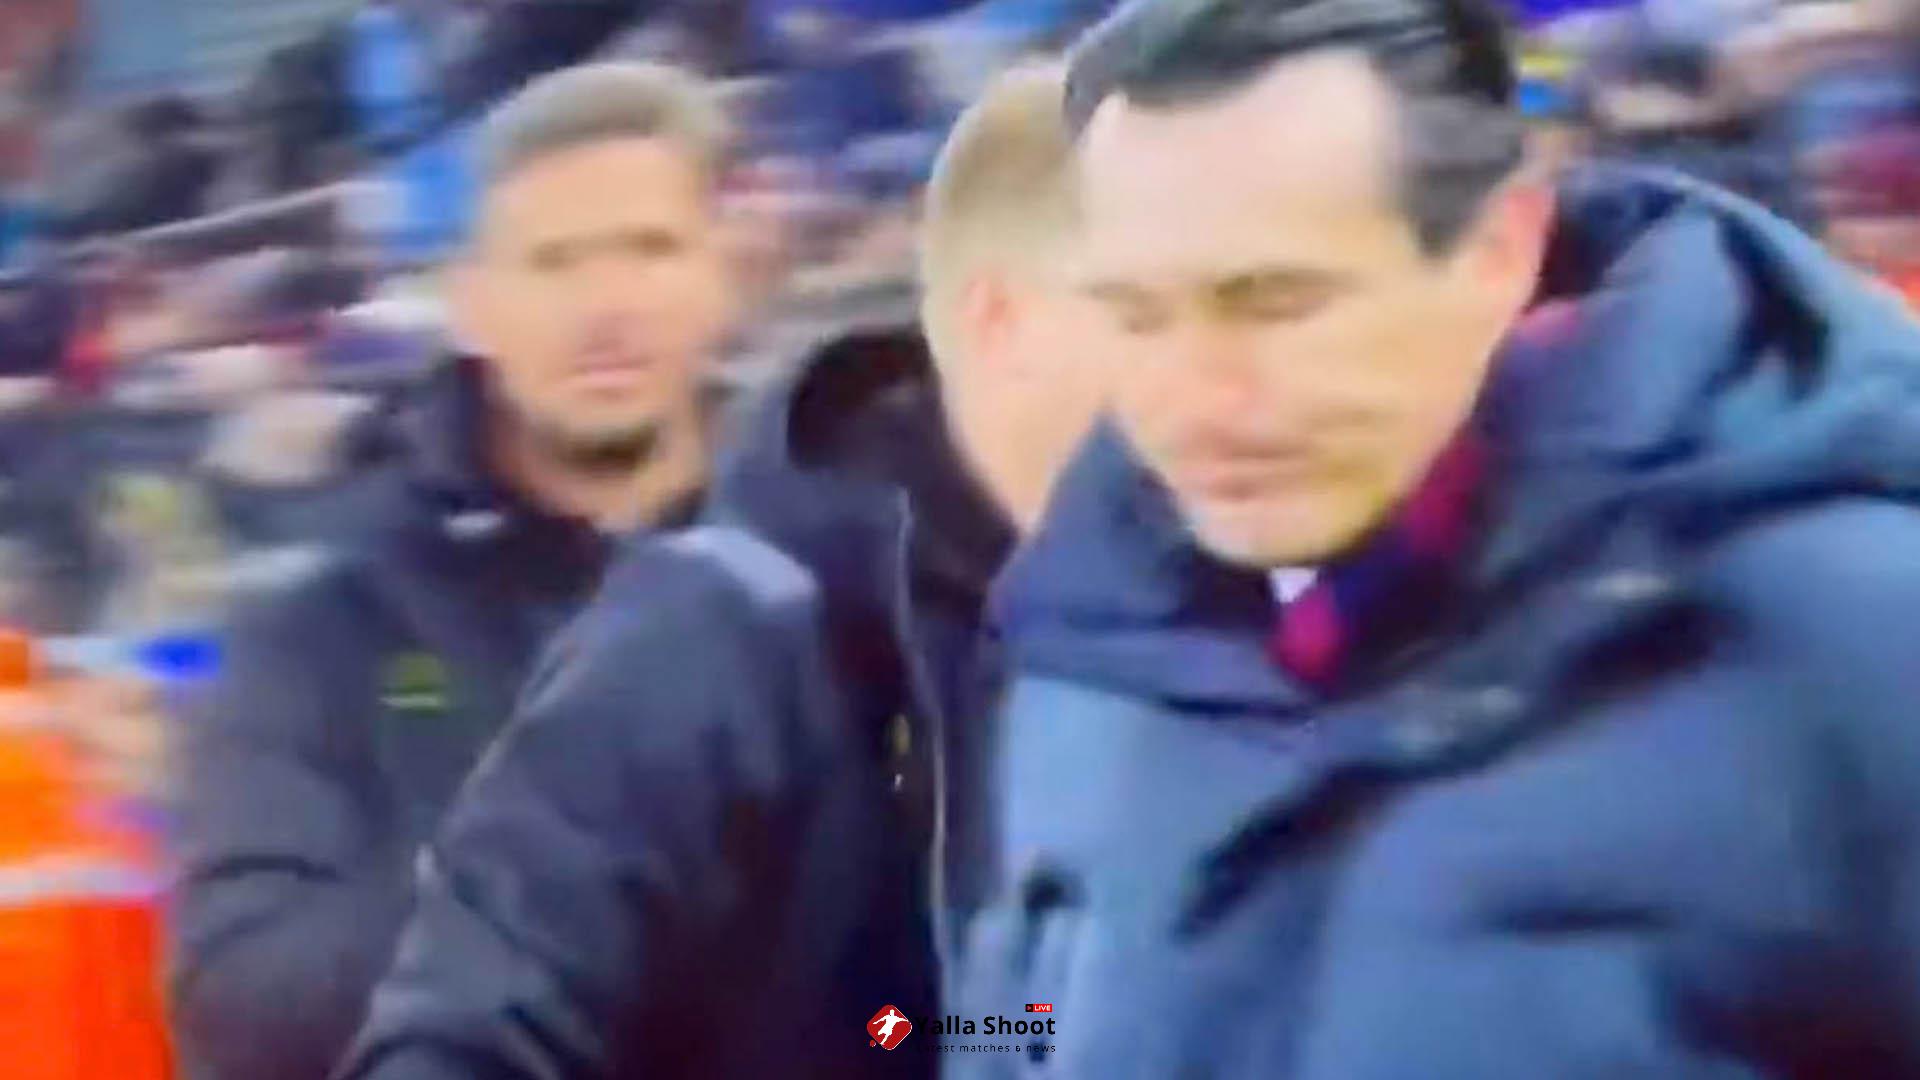 Eagle-eyed fans spot awkward moment Newcastle assistant Jason Tindall is 'SNUBBED' by Emery as he's denied handshake